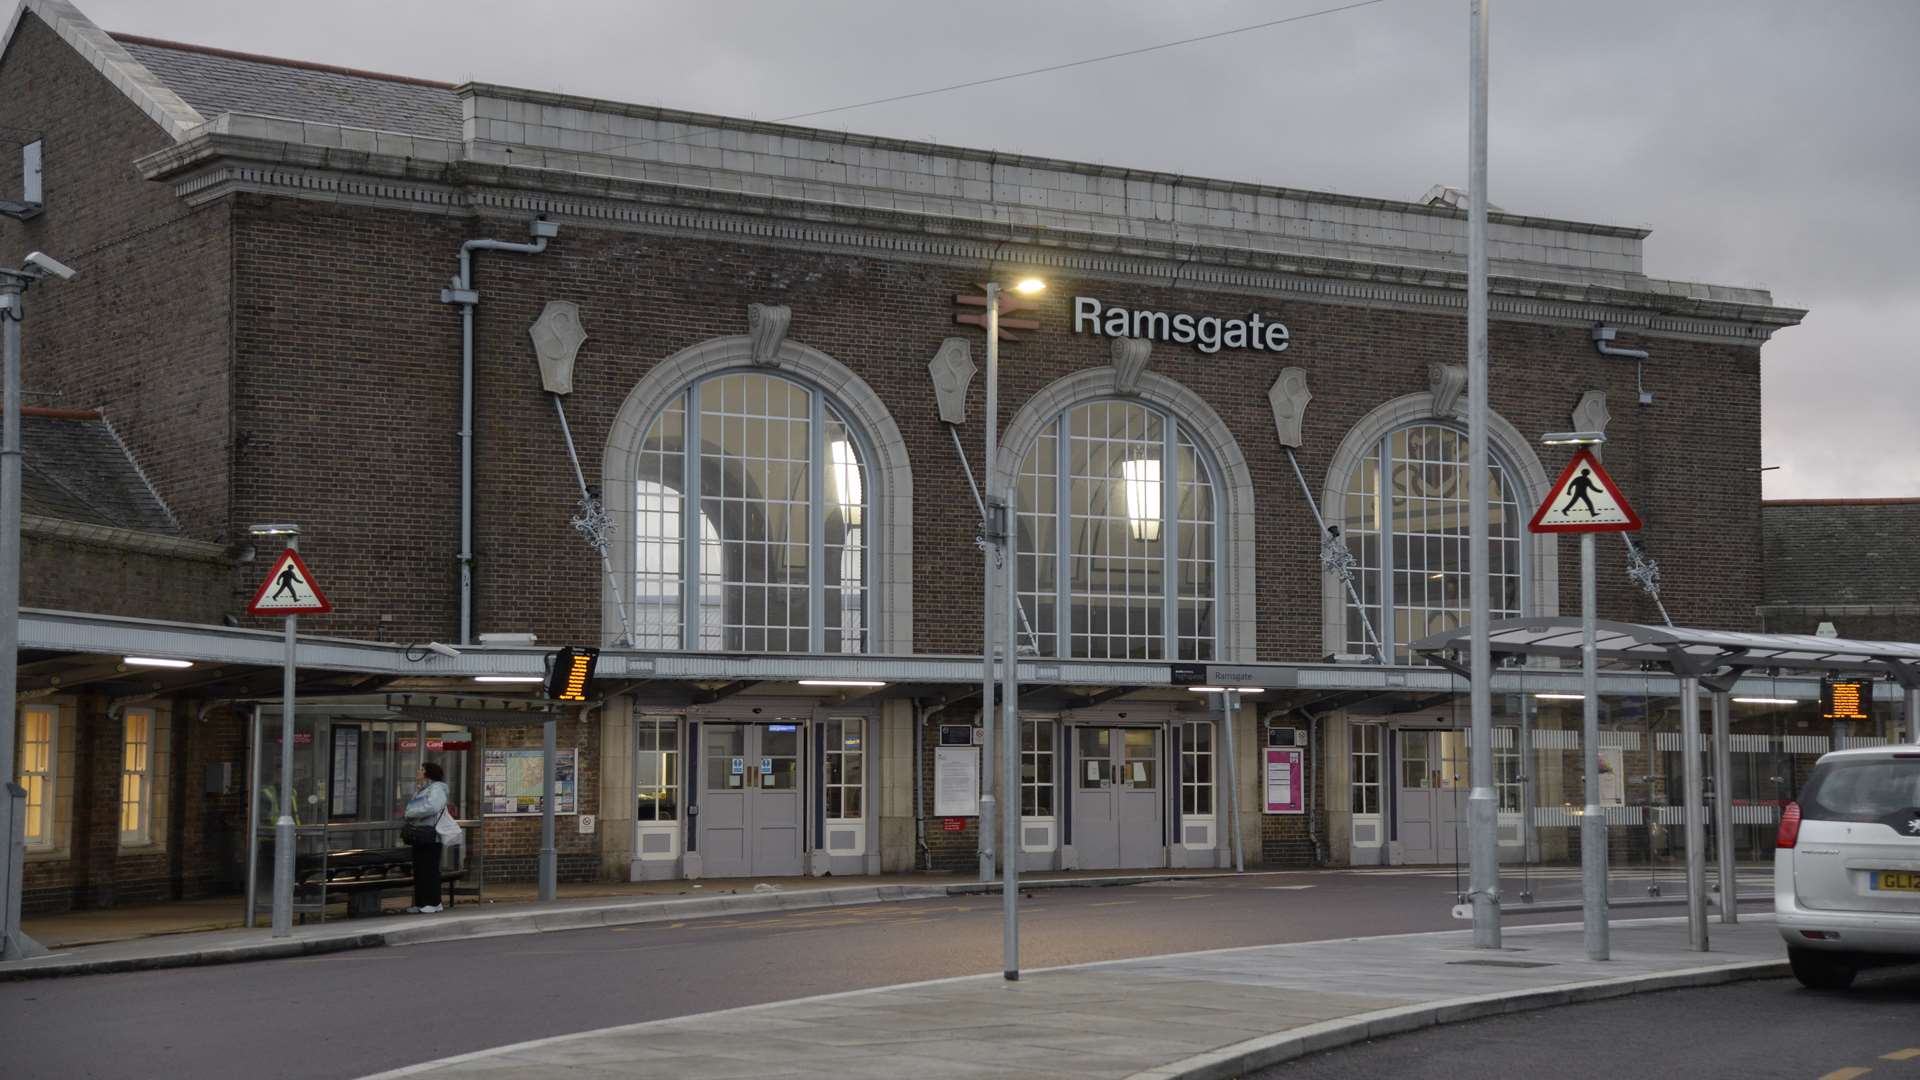 Ramsgate railway station where the incident took place.